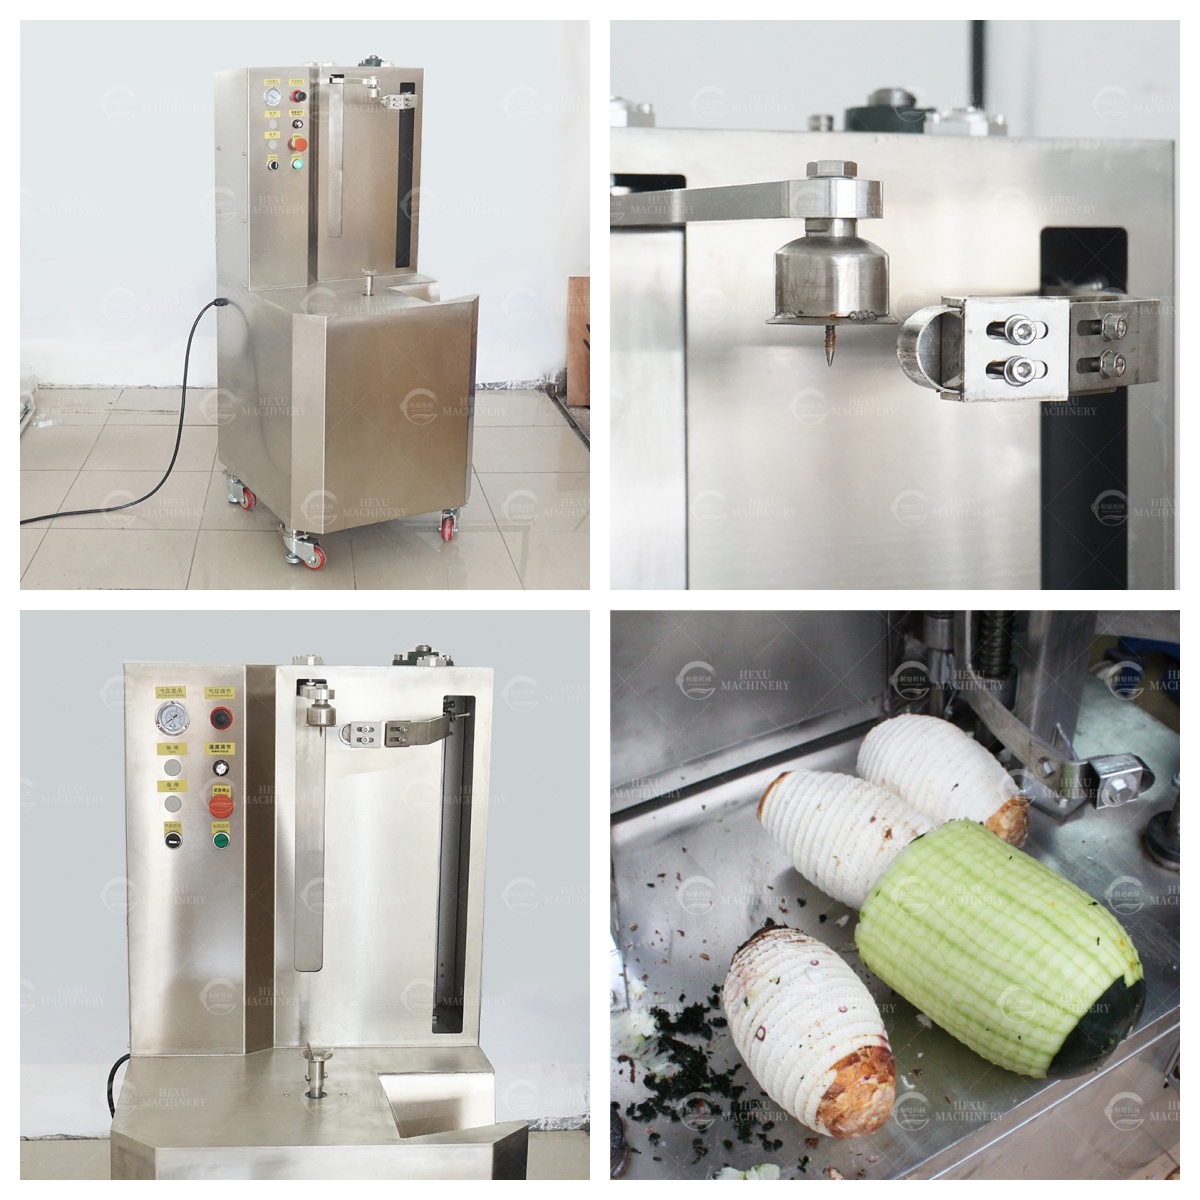 Deep processing of winter melon to enhance its value.